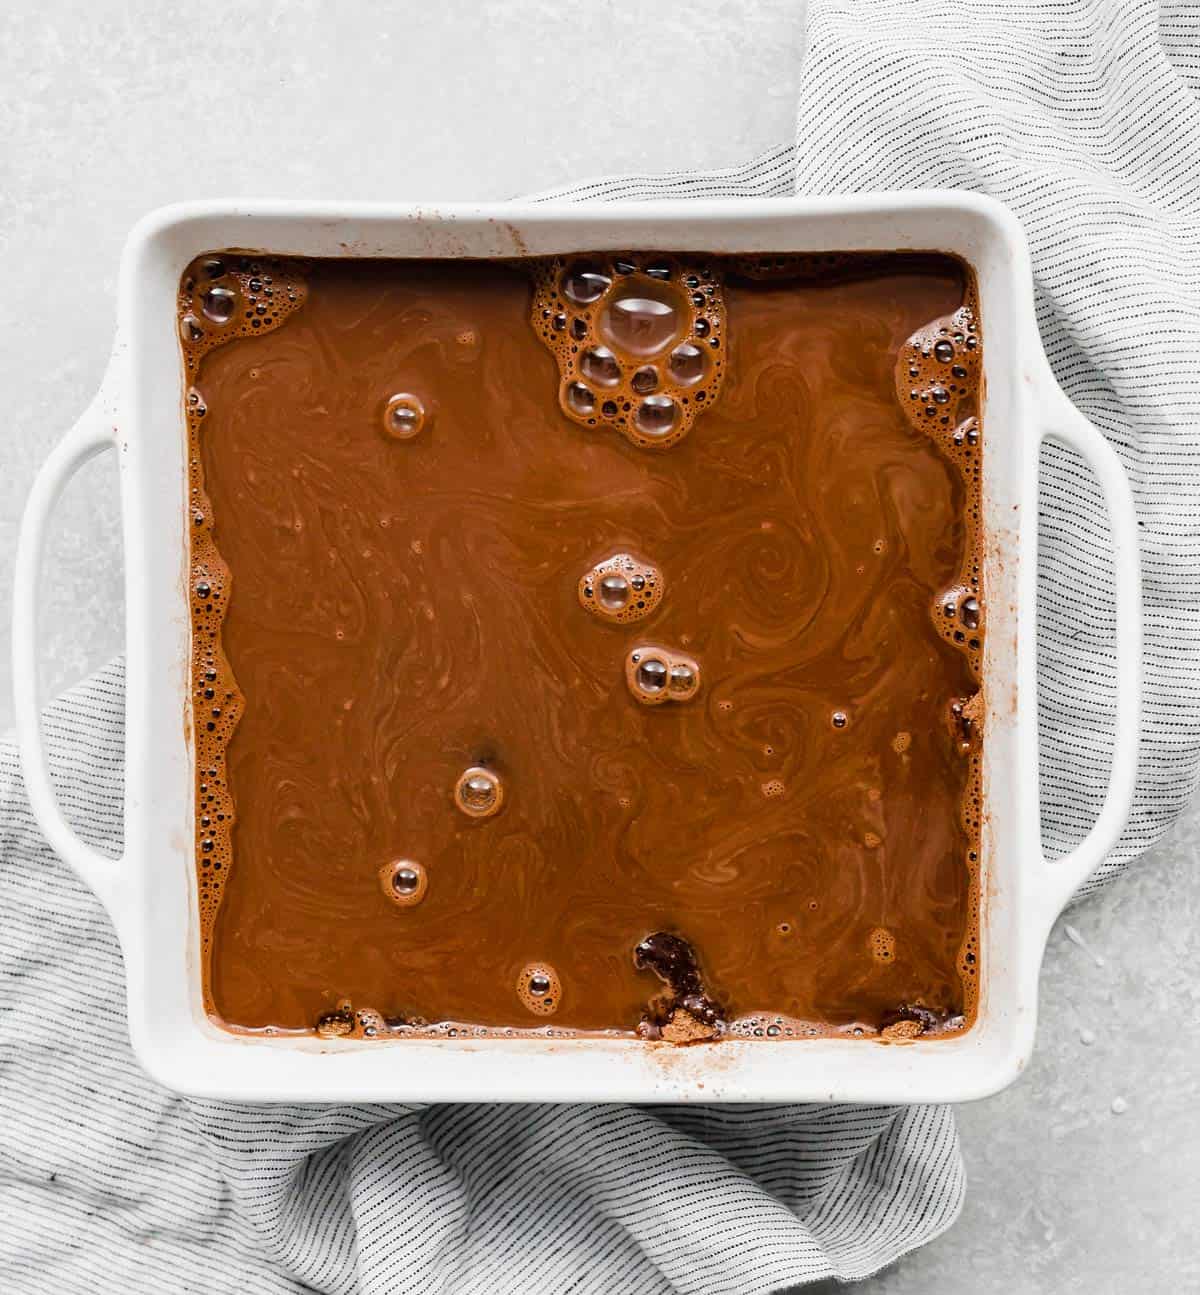 A square white pan with boiling water poured overtop a hot fudge cake batter.